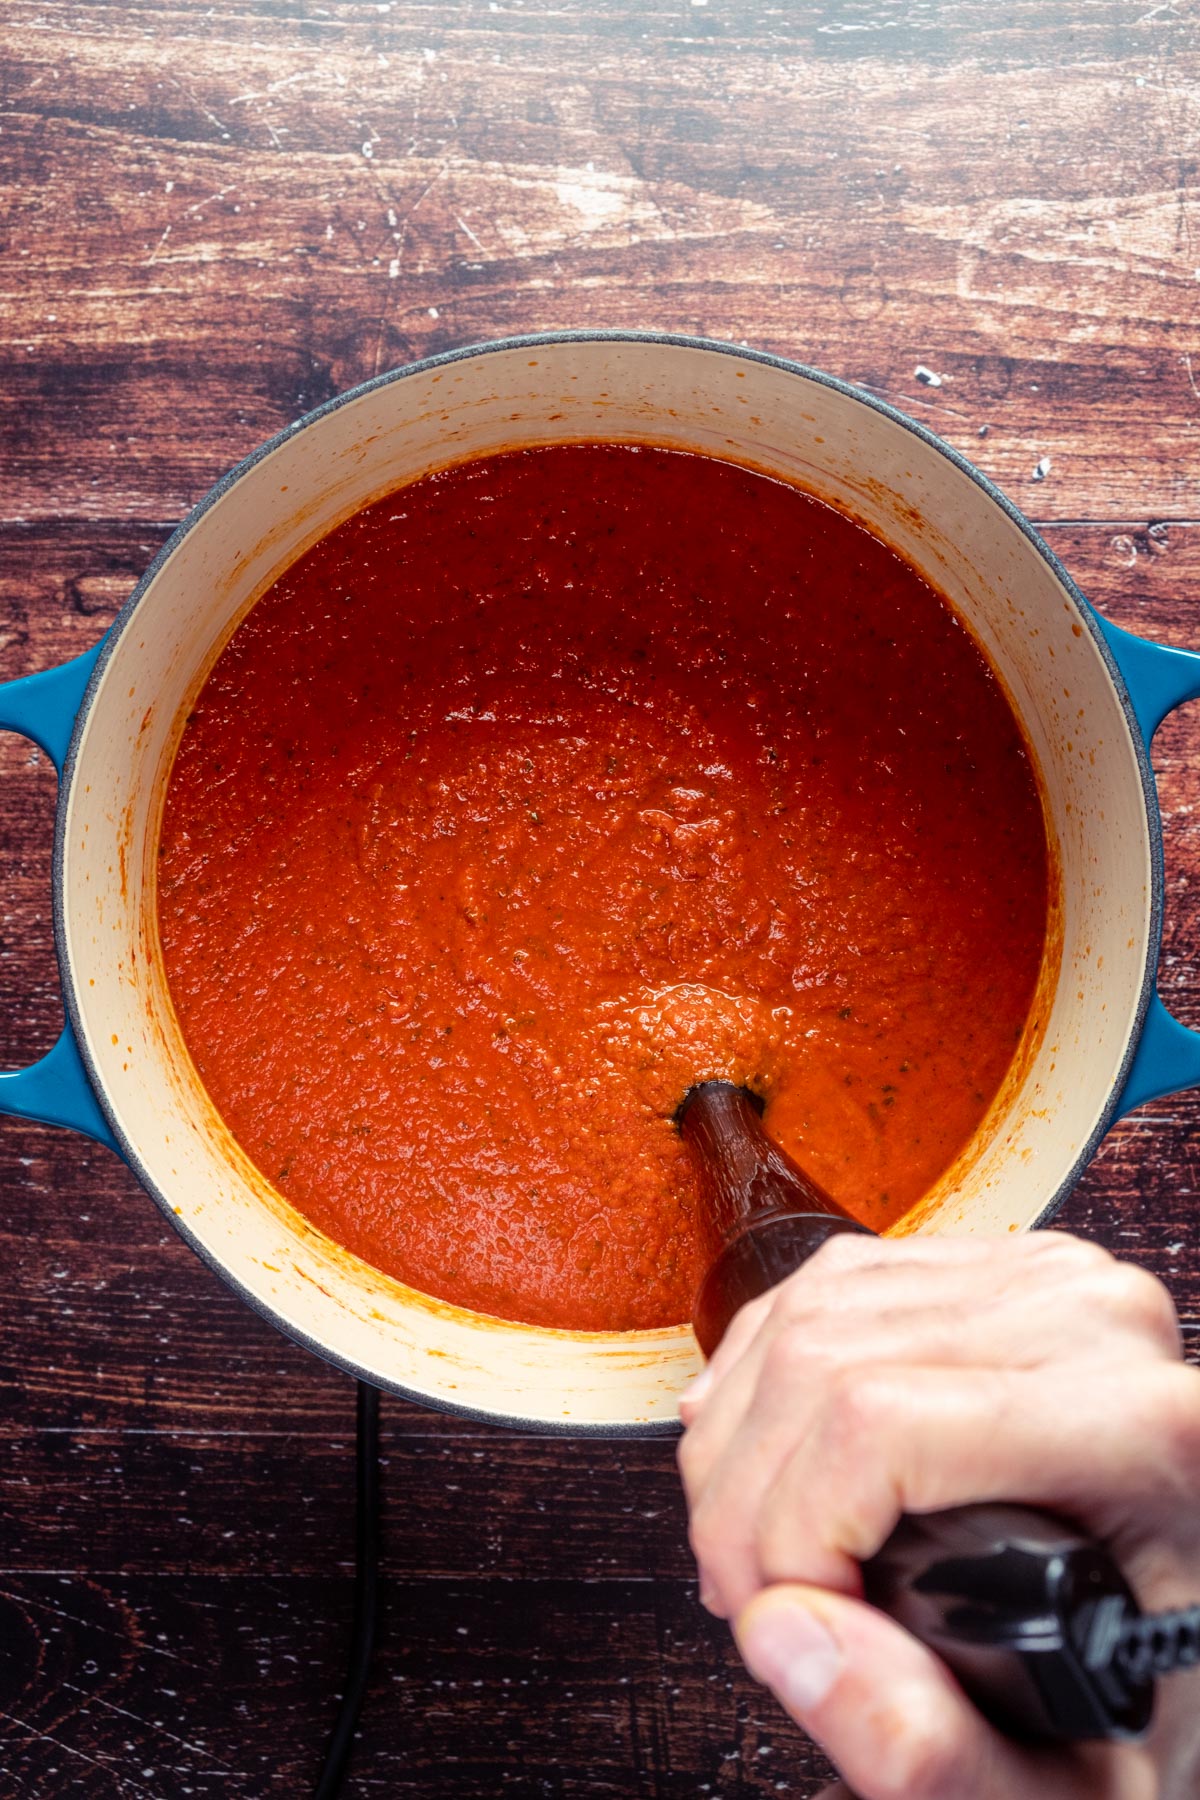 Blending spaghetti sauce in the pot with an immersion blender.